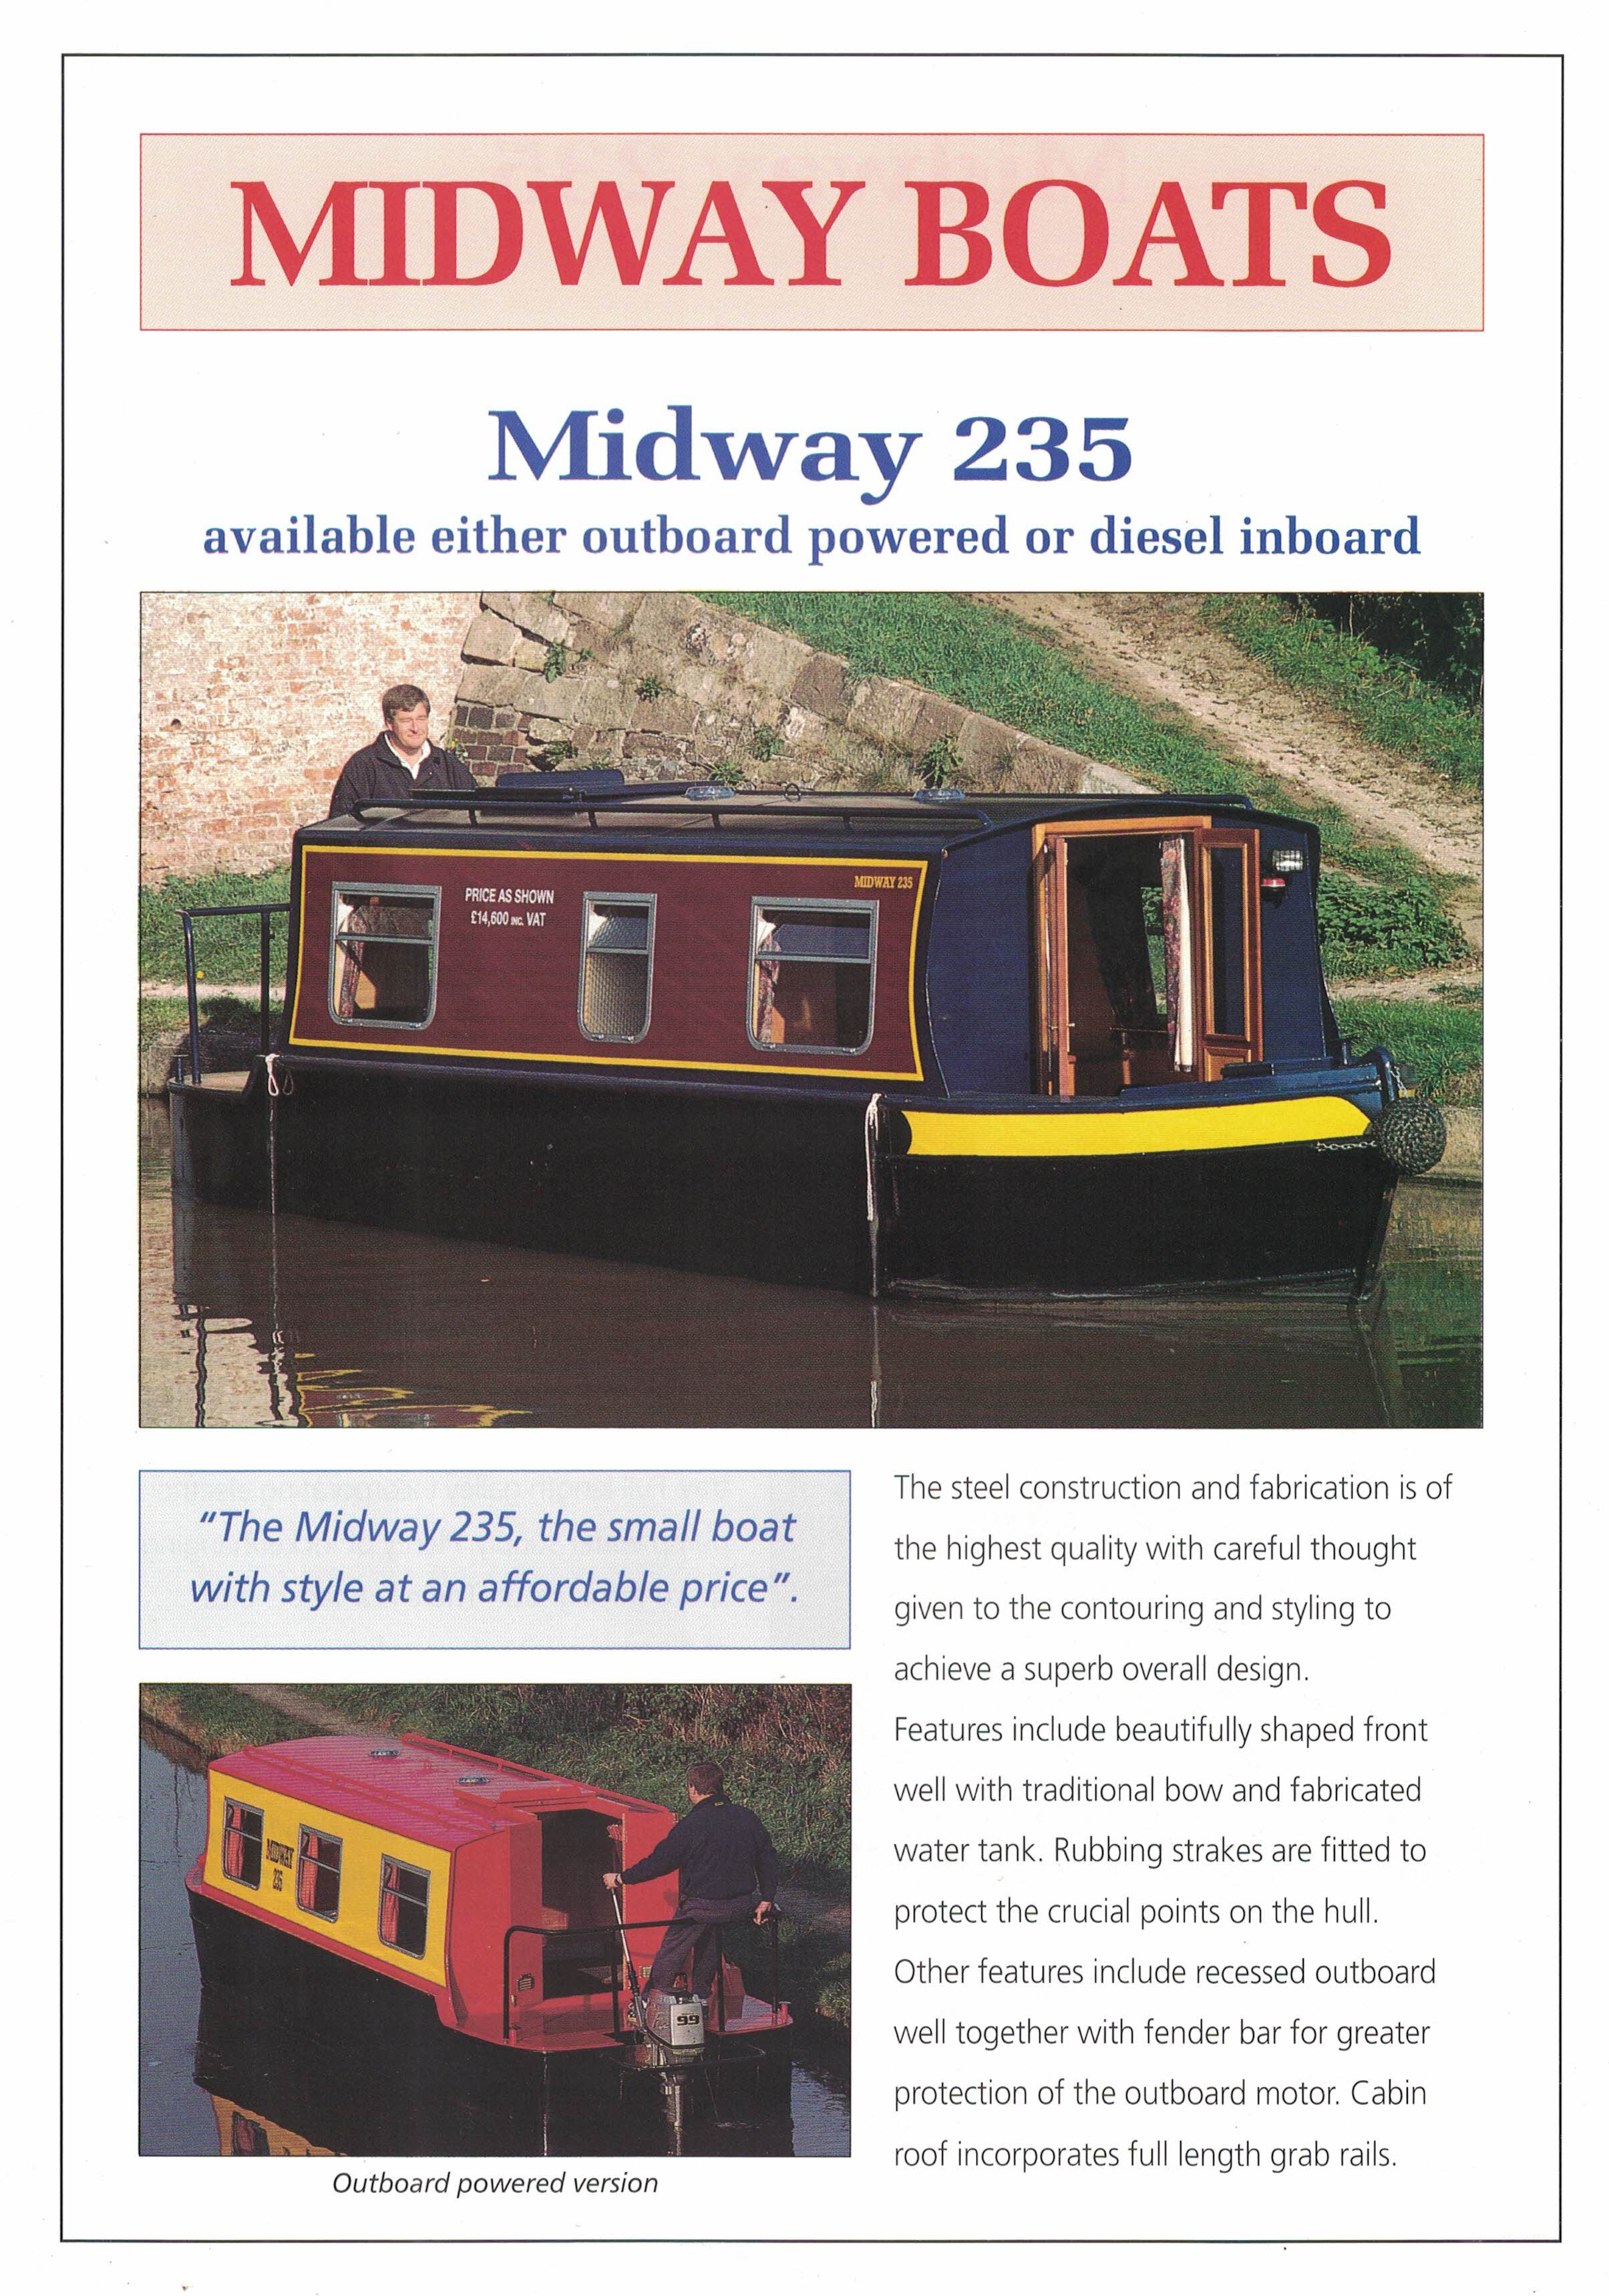 Midway 235 early edition Sales Brochure